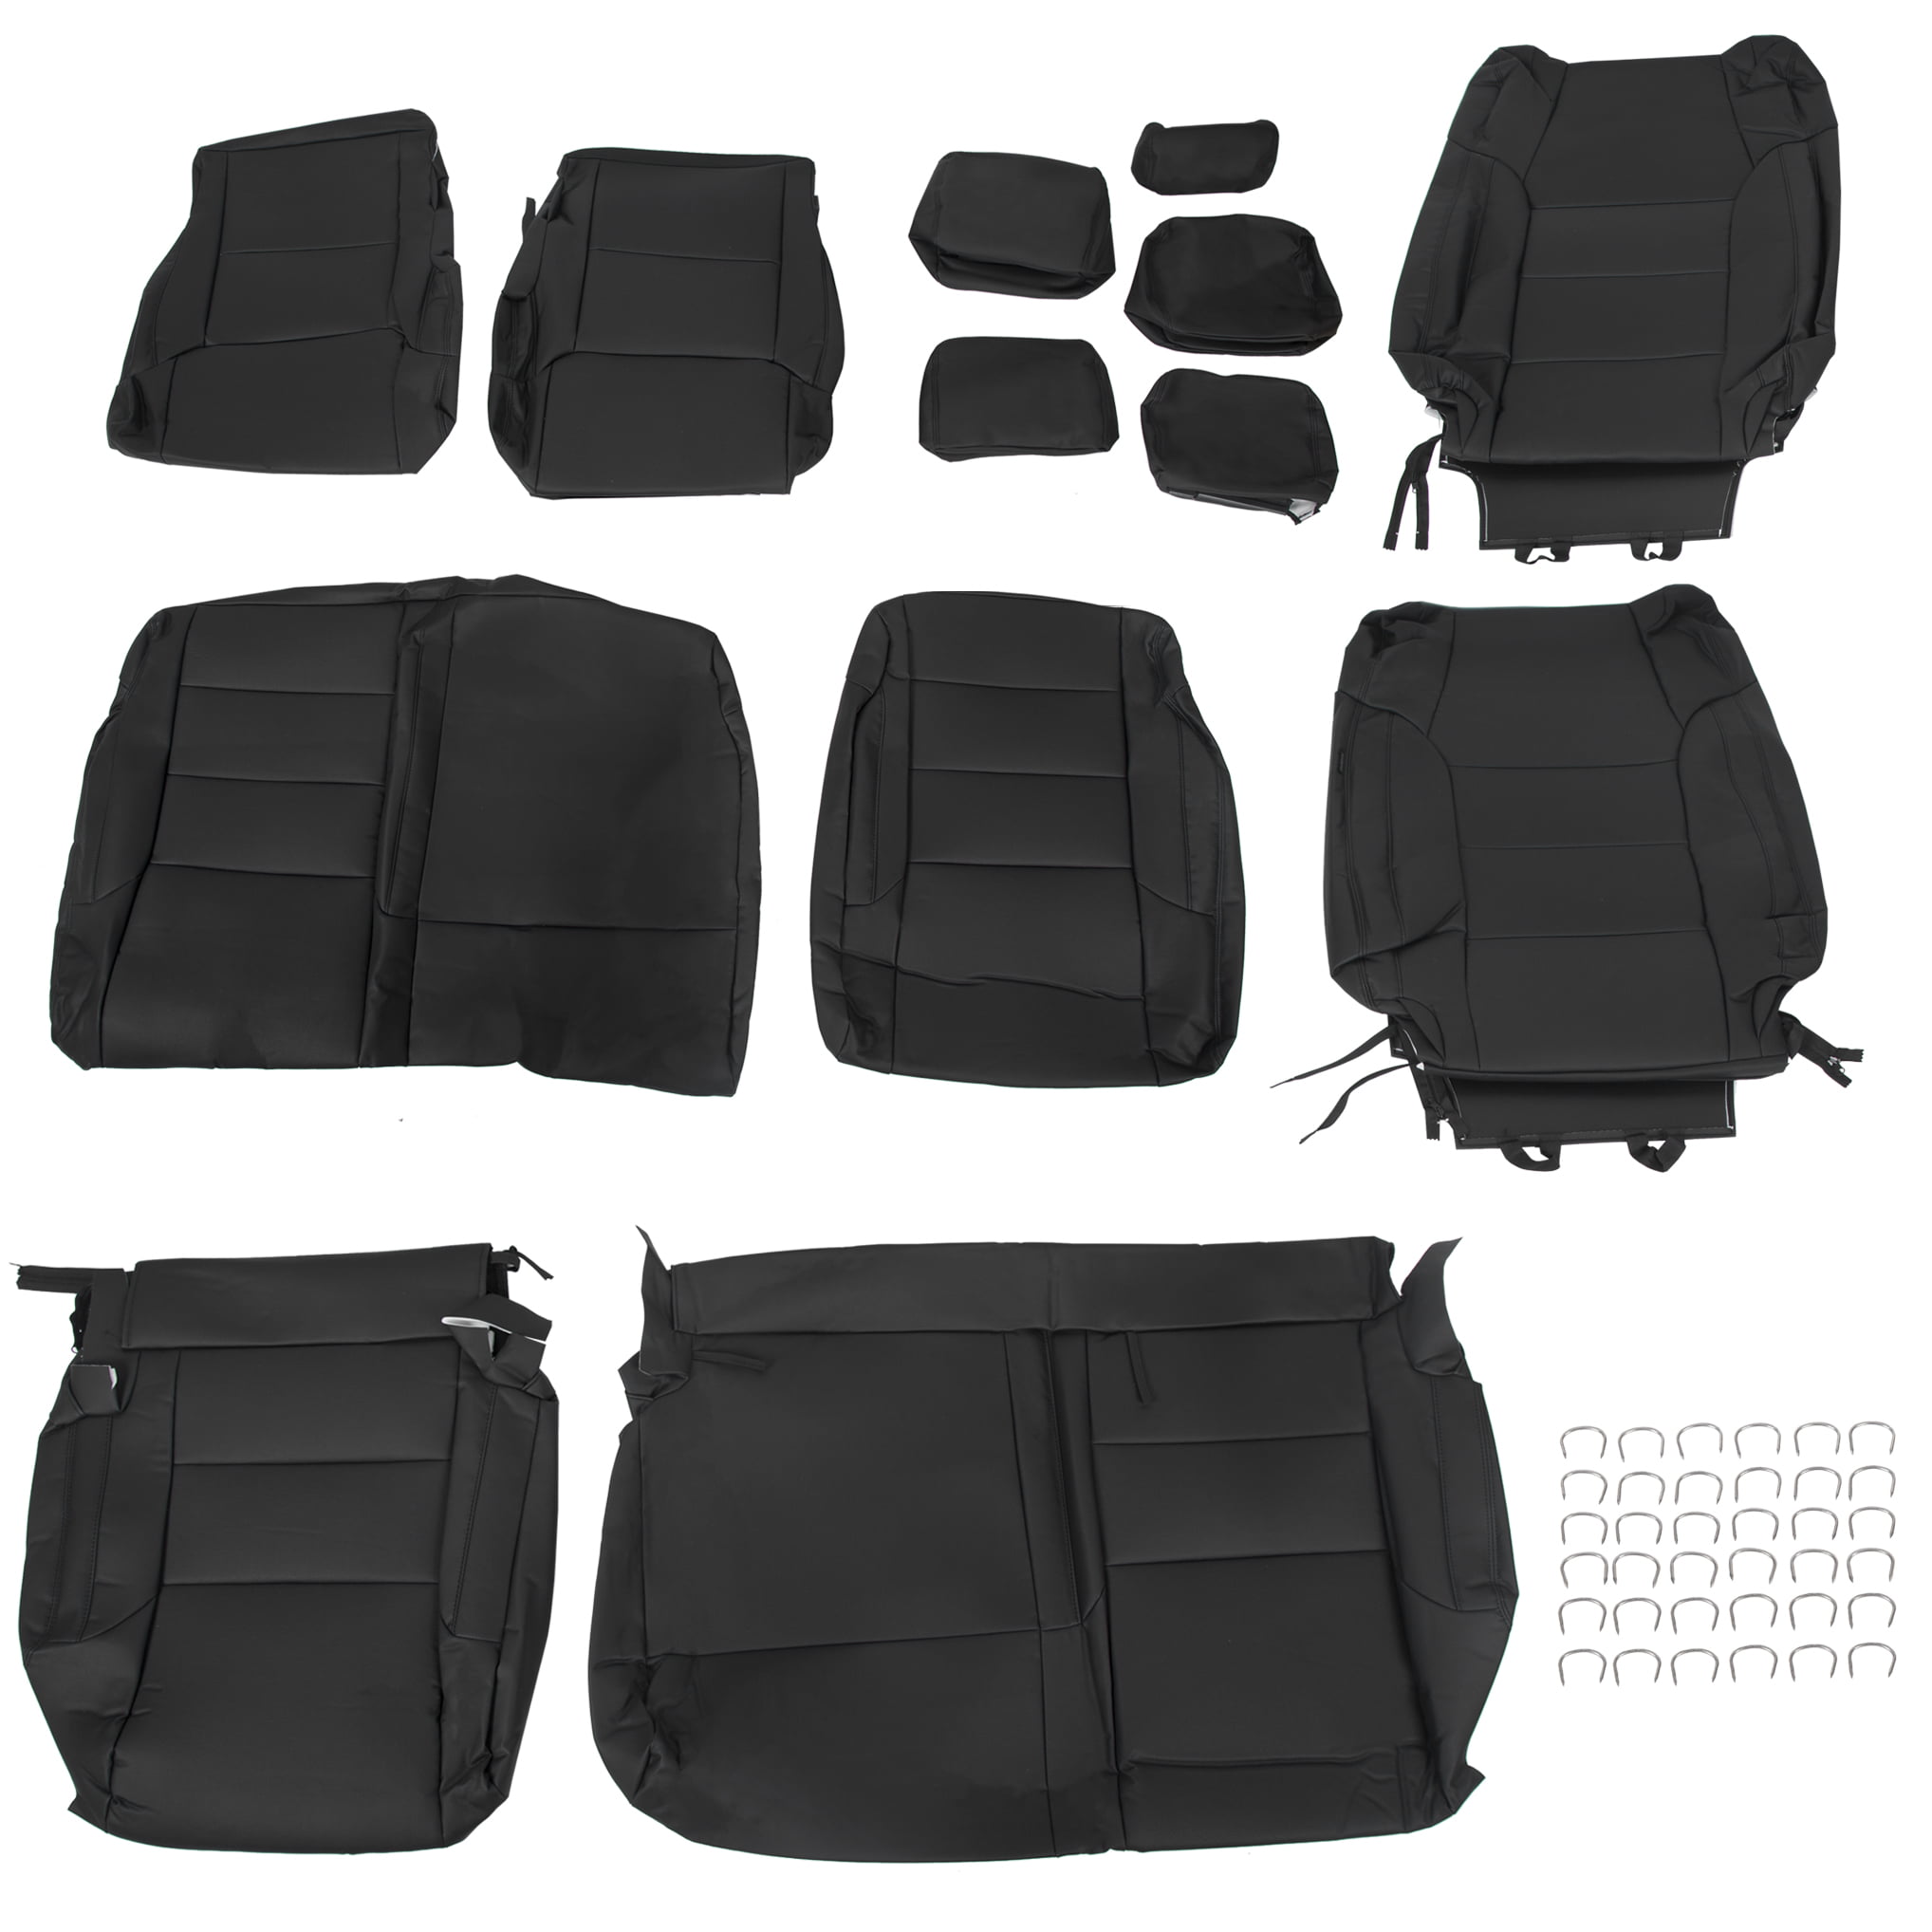 For 2014-2020 2019 2018 Toyota Tundra Double Cab Seat Covers Kit Black TRD SR5 - Walmart.com Seat Covers For 2019 Toyota Tundra Double Cab